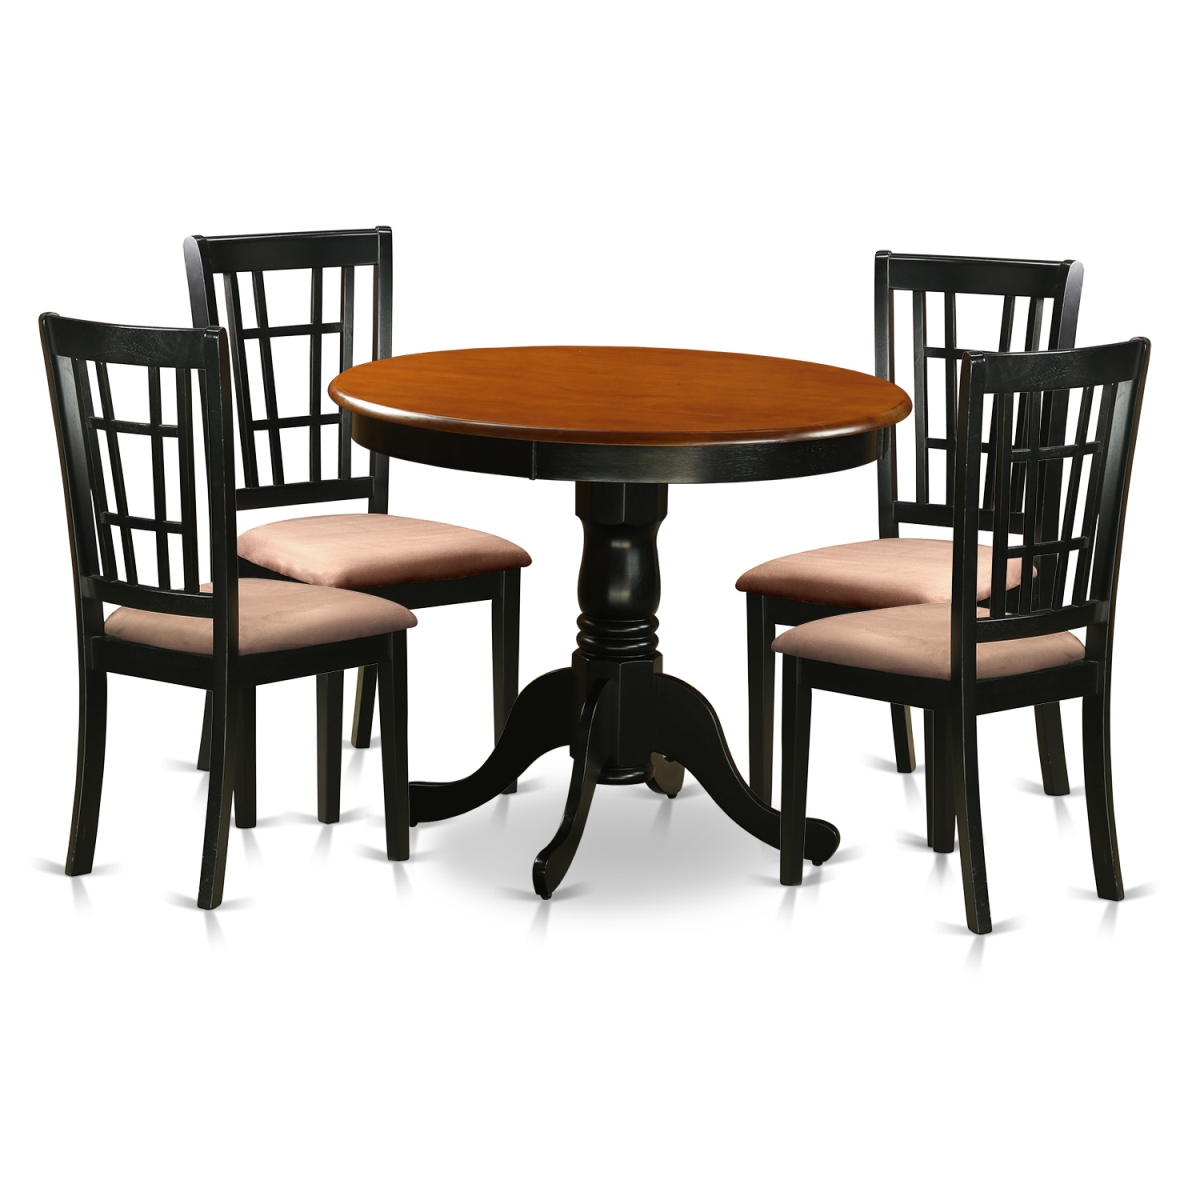 Picture of East West Furniture ANNI5-BLK-C Dining Table with 4 Microfiber Chairs, Black & Cherry - 5 Piece